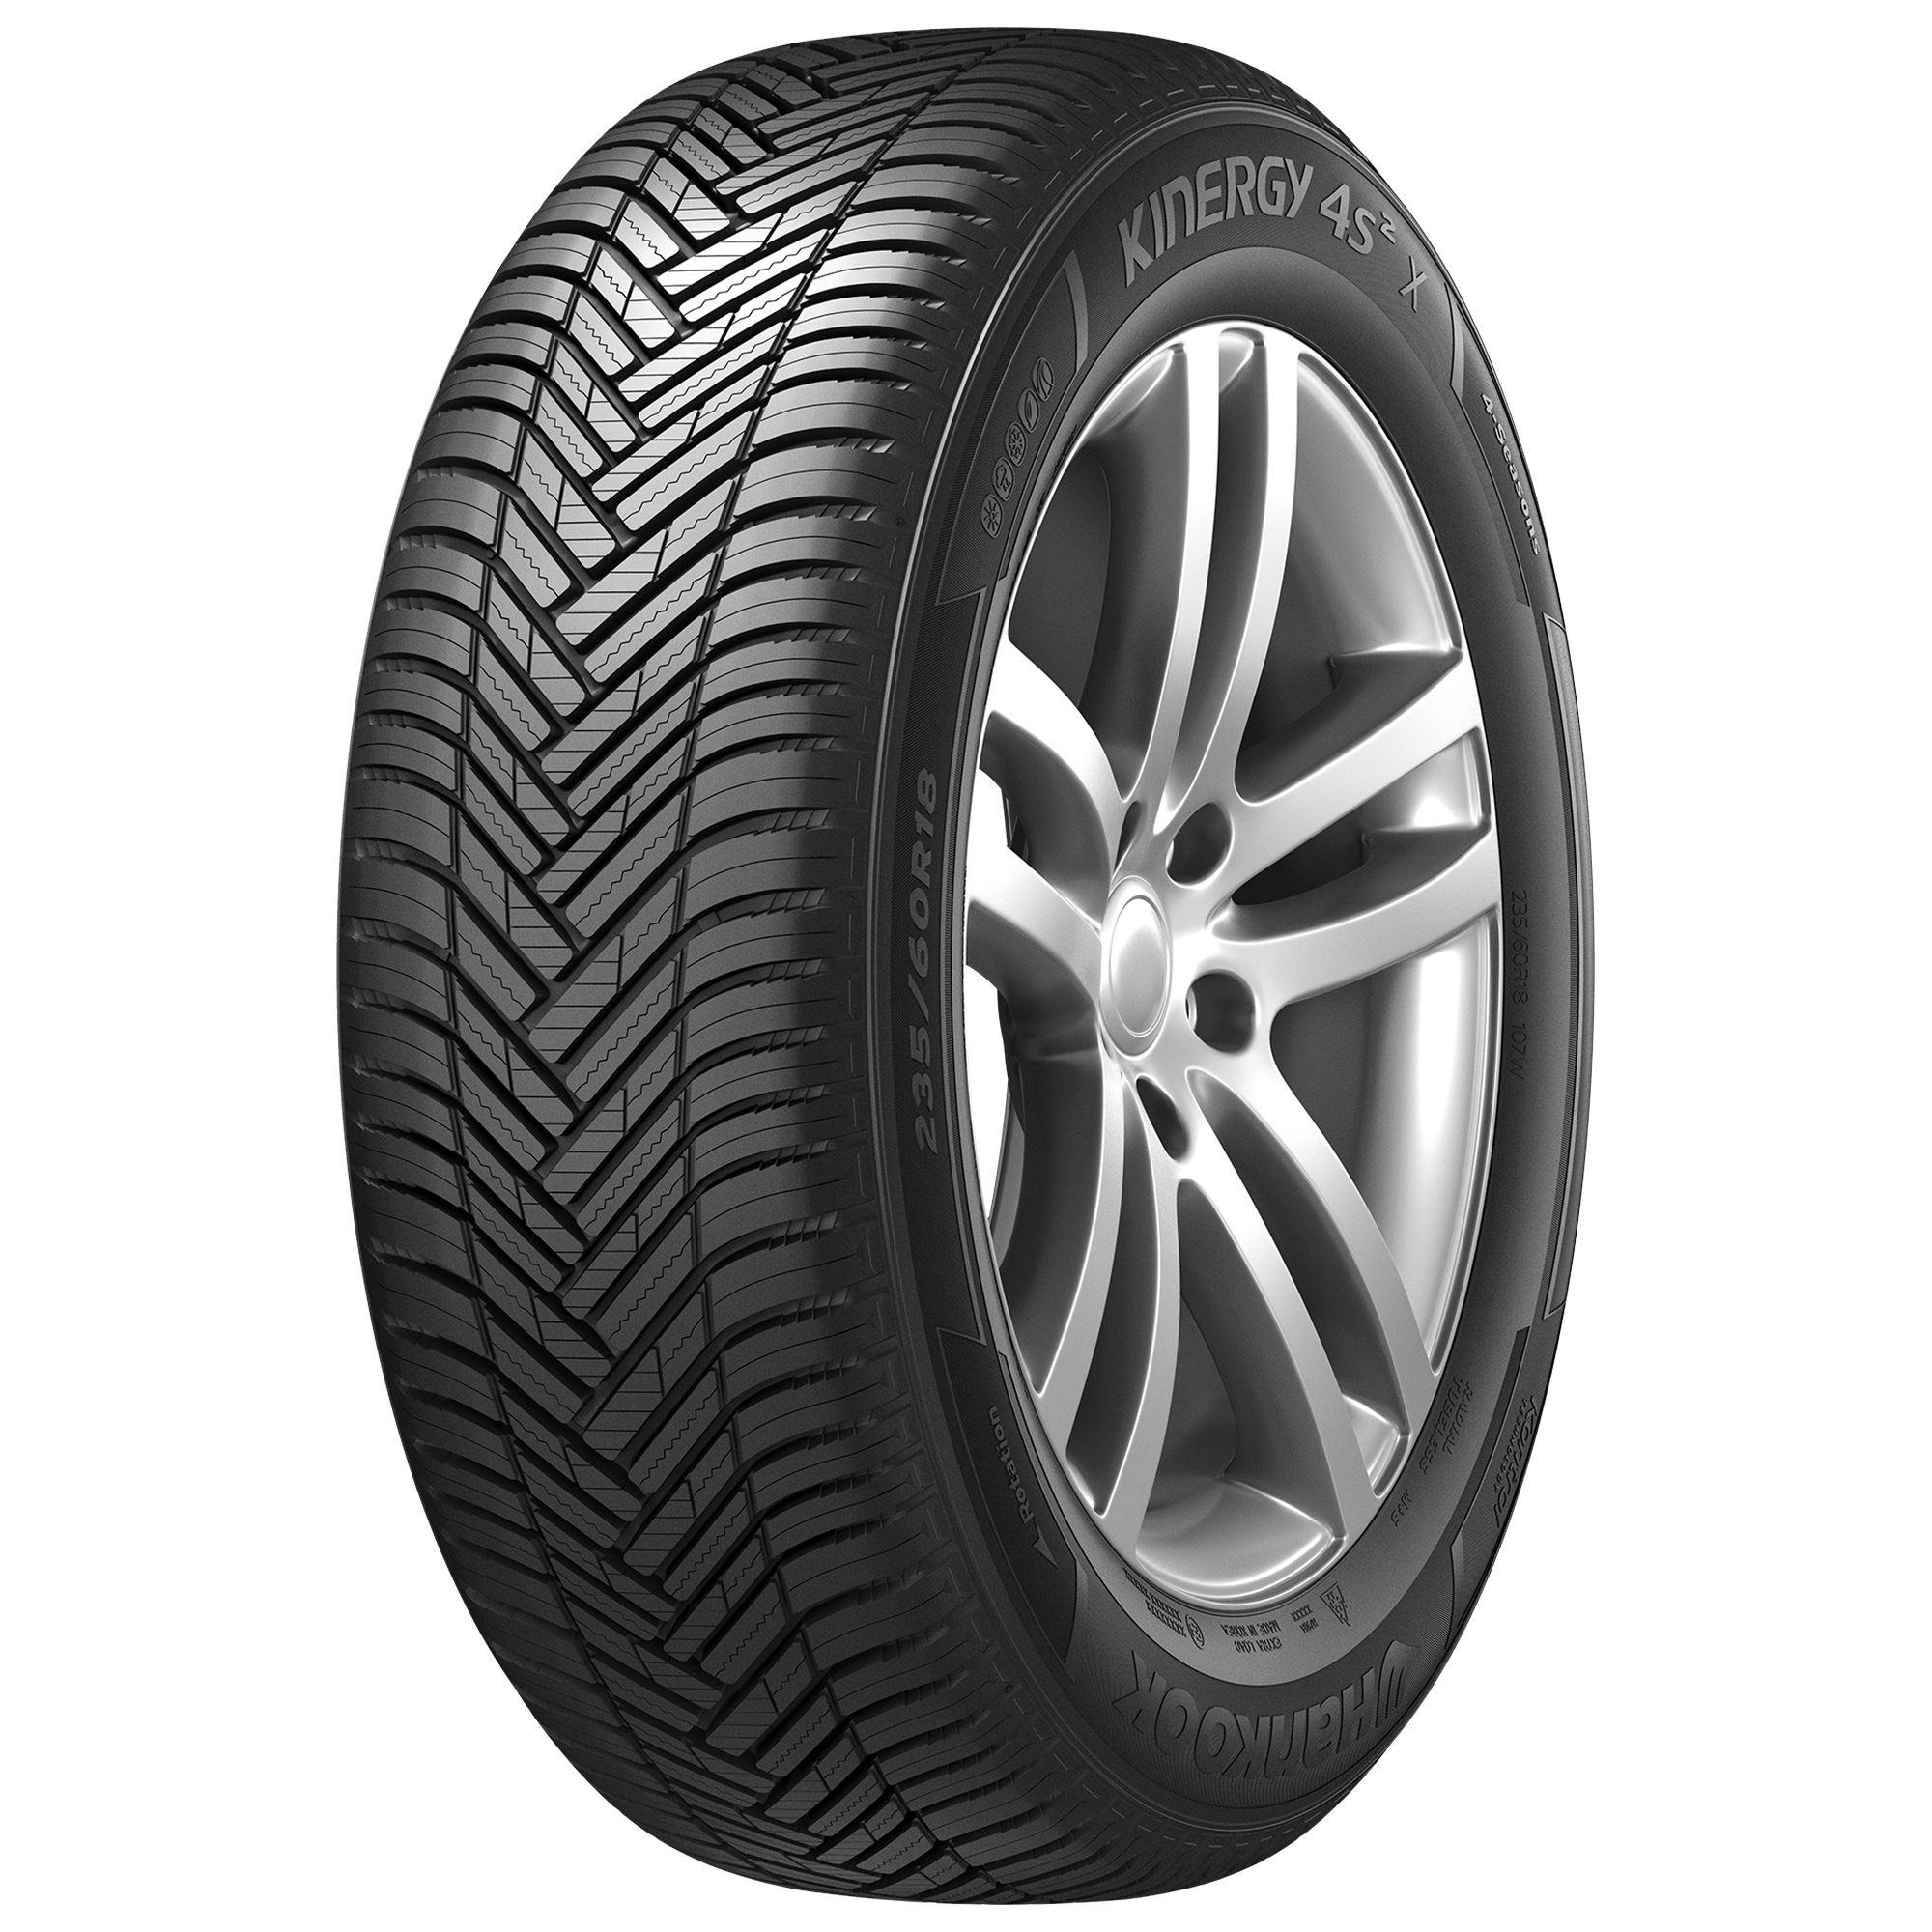 HANKOOK KINERGY 4S 2 X (H750A) 215/65R17 103V BSW